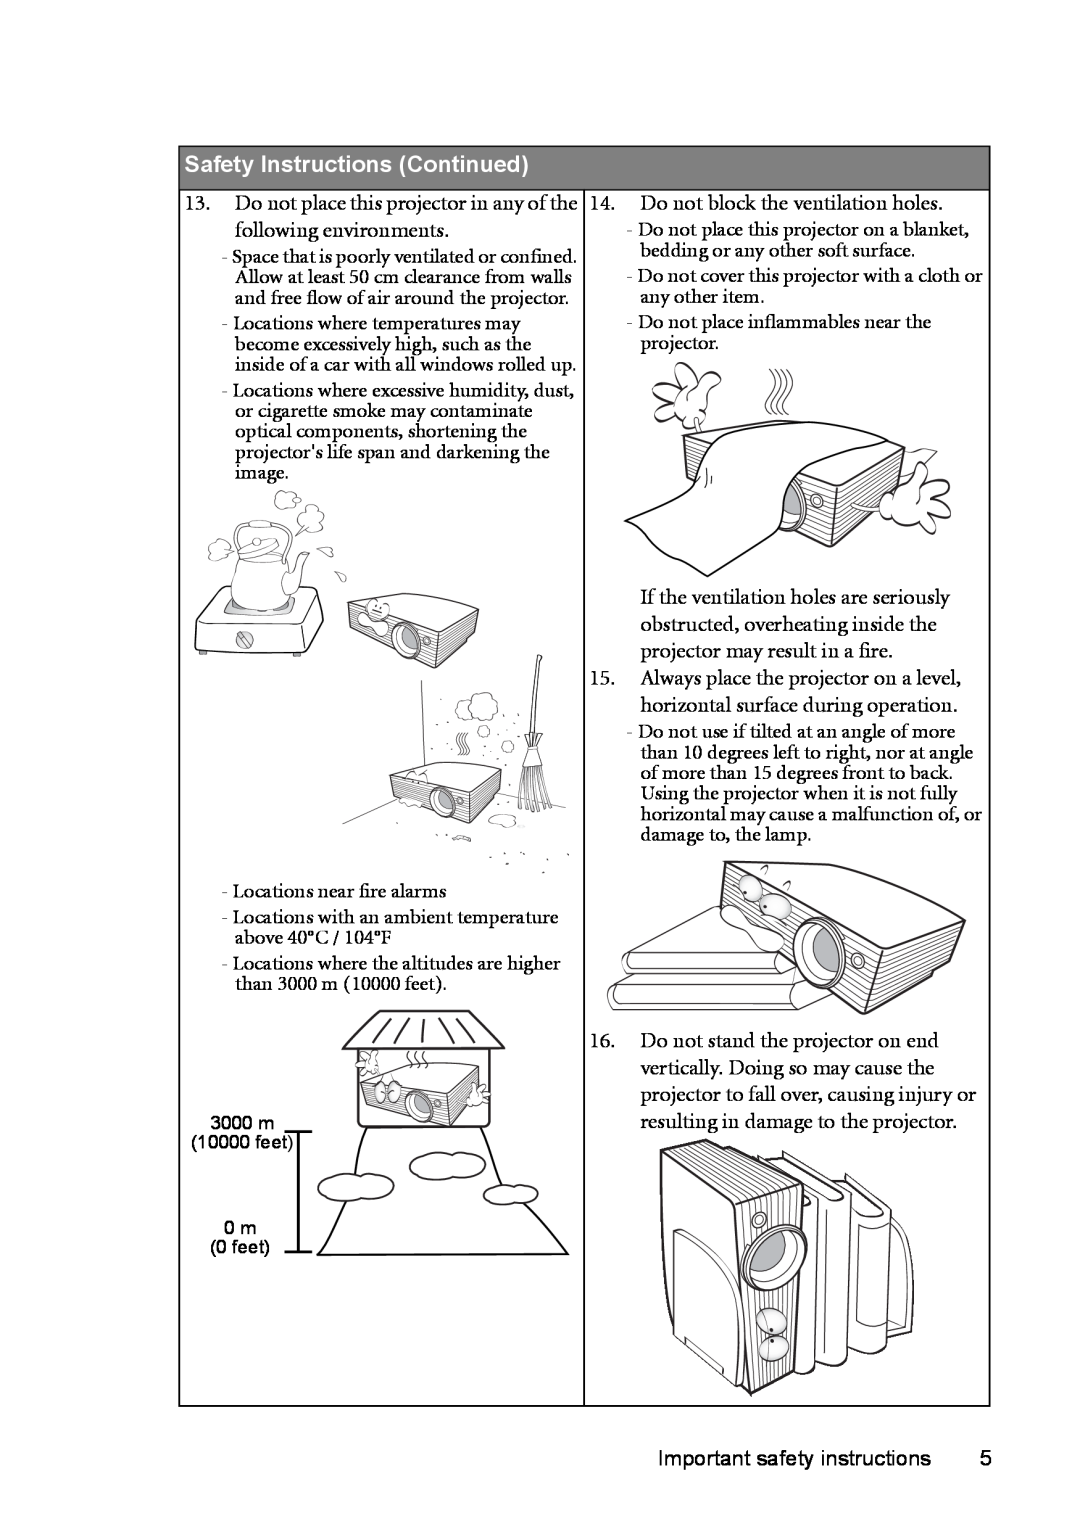 BenQ MP730 manual Safety Instructions Continued, Space that is poorly ventilated or confined, 3000 m, feet 